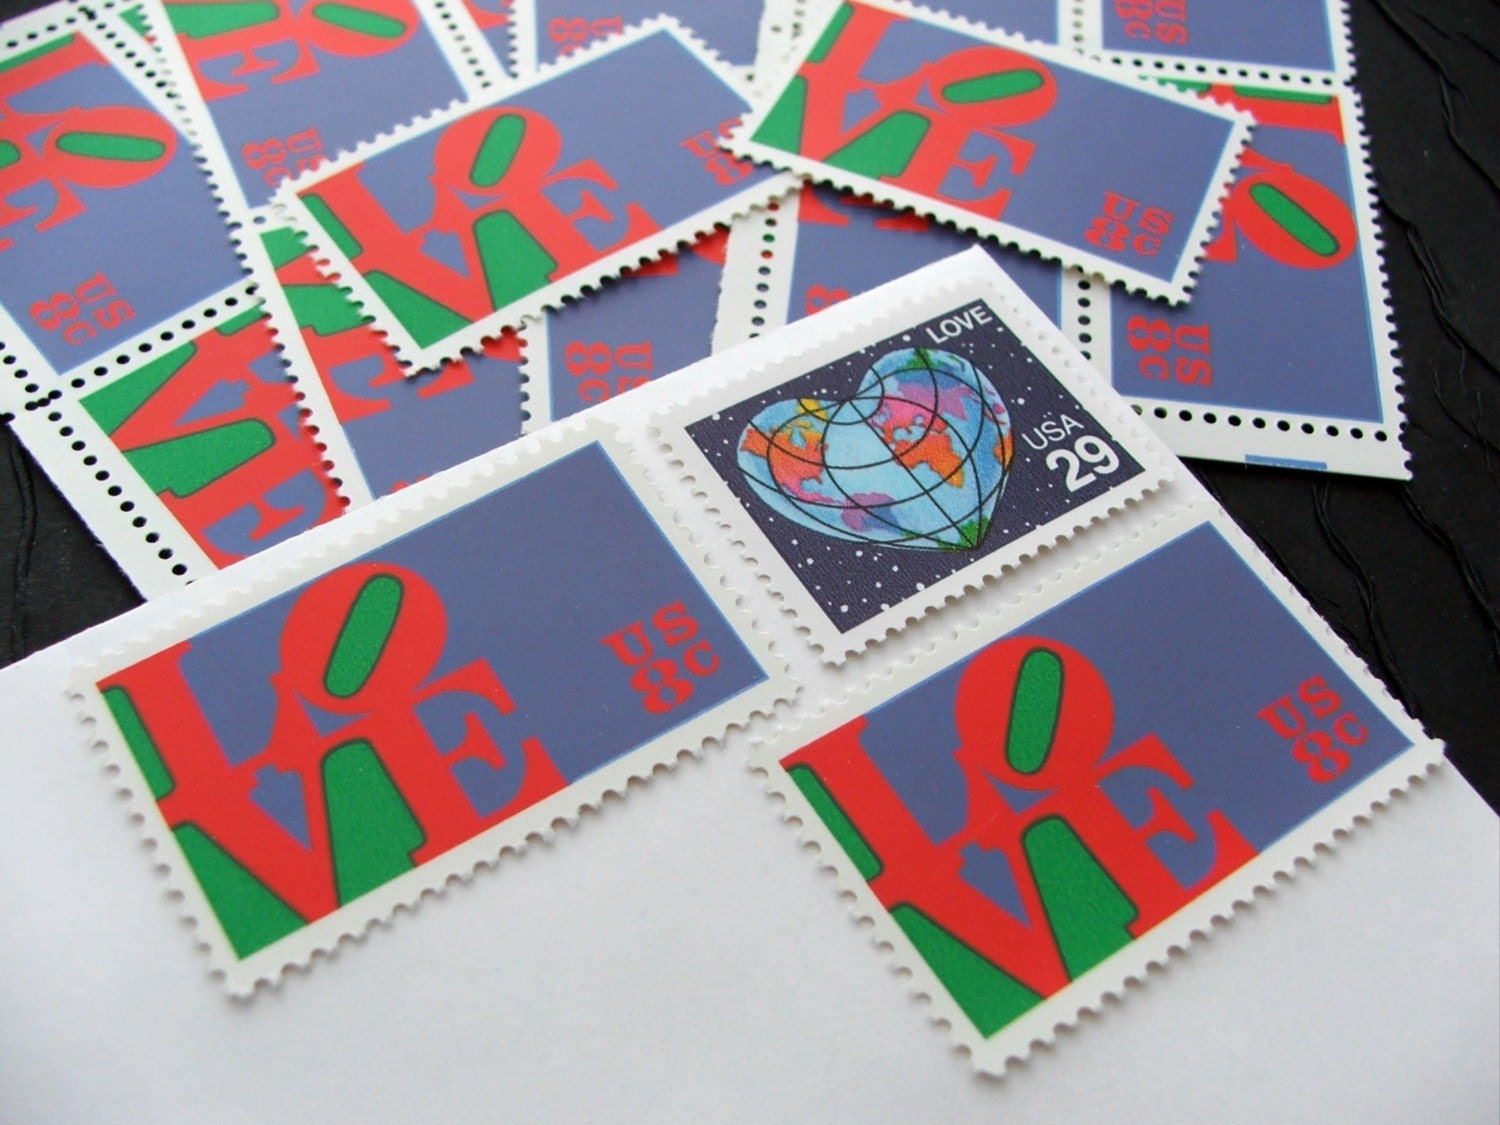 HAITI RELIEF .. A World of Love .. UNused Vintage Postage Stamps .. to post 5 letters